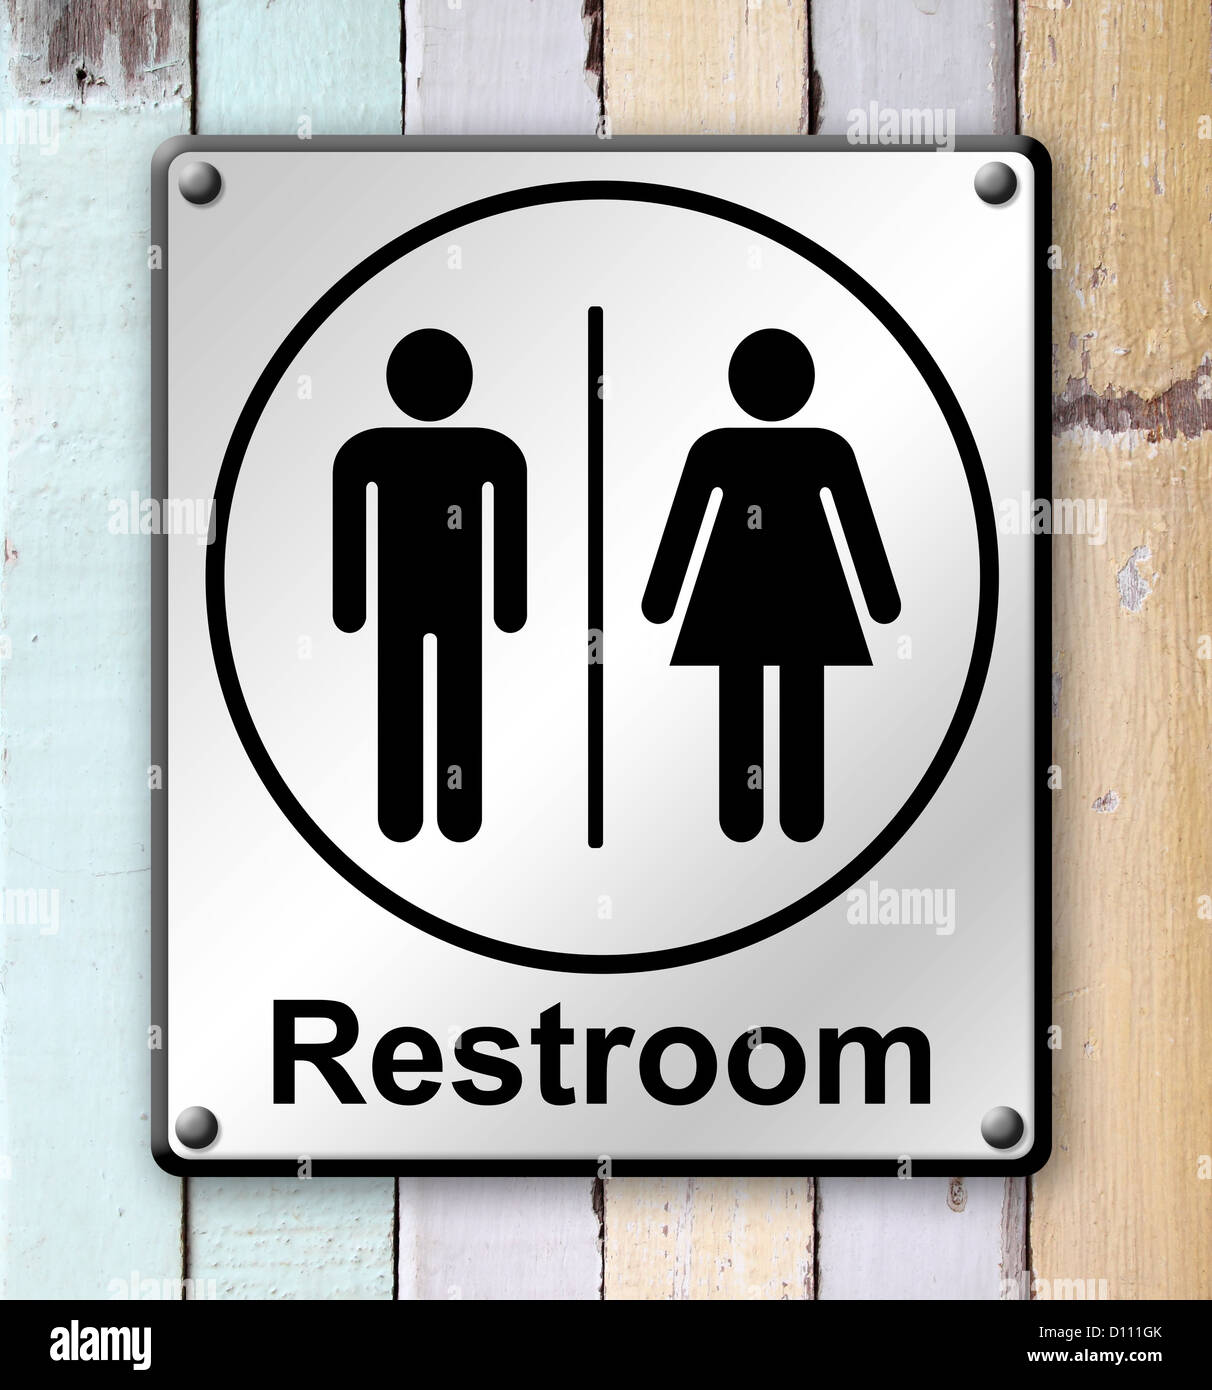 restroom sign on old colour wooden wall background Stock Photo